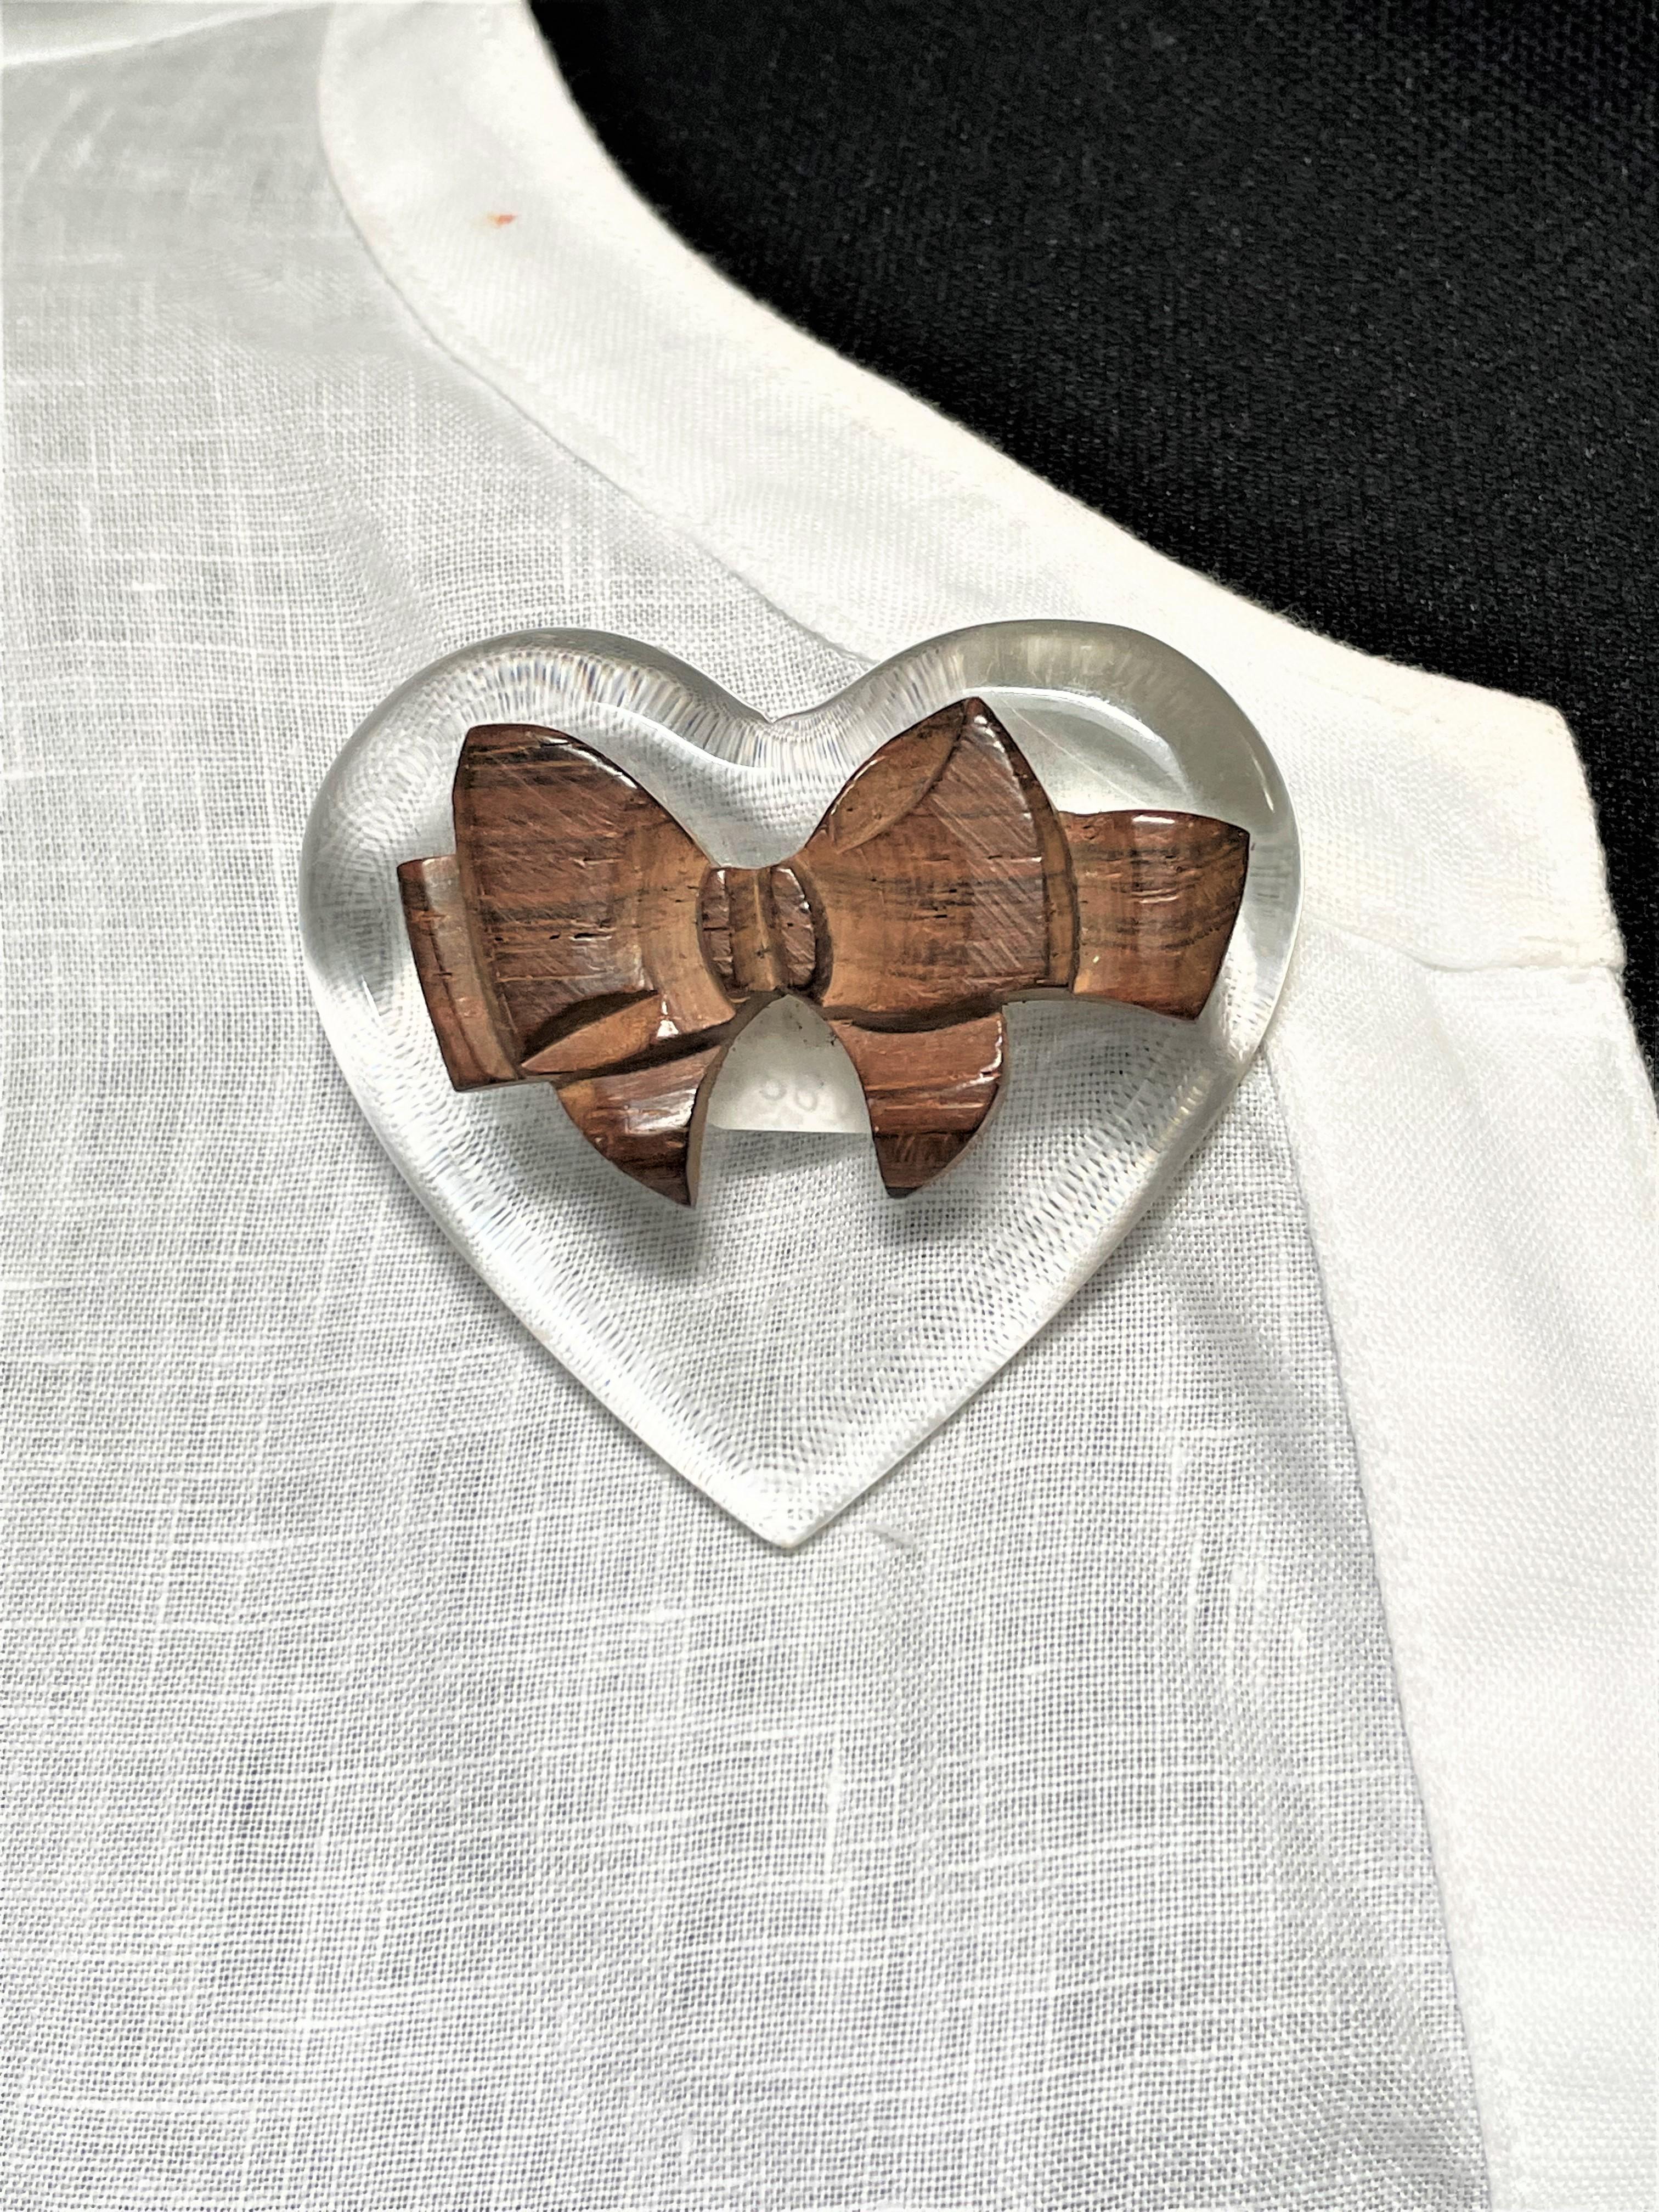 Vintage heart brooch made by lucite decorated with a bow made of wood, 1930s USA For Sale 2